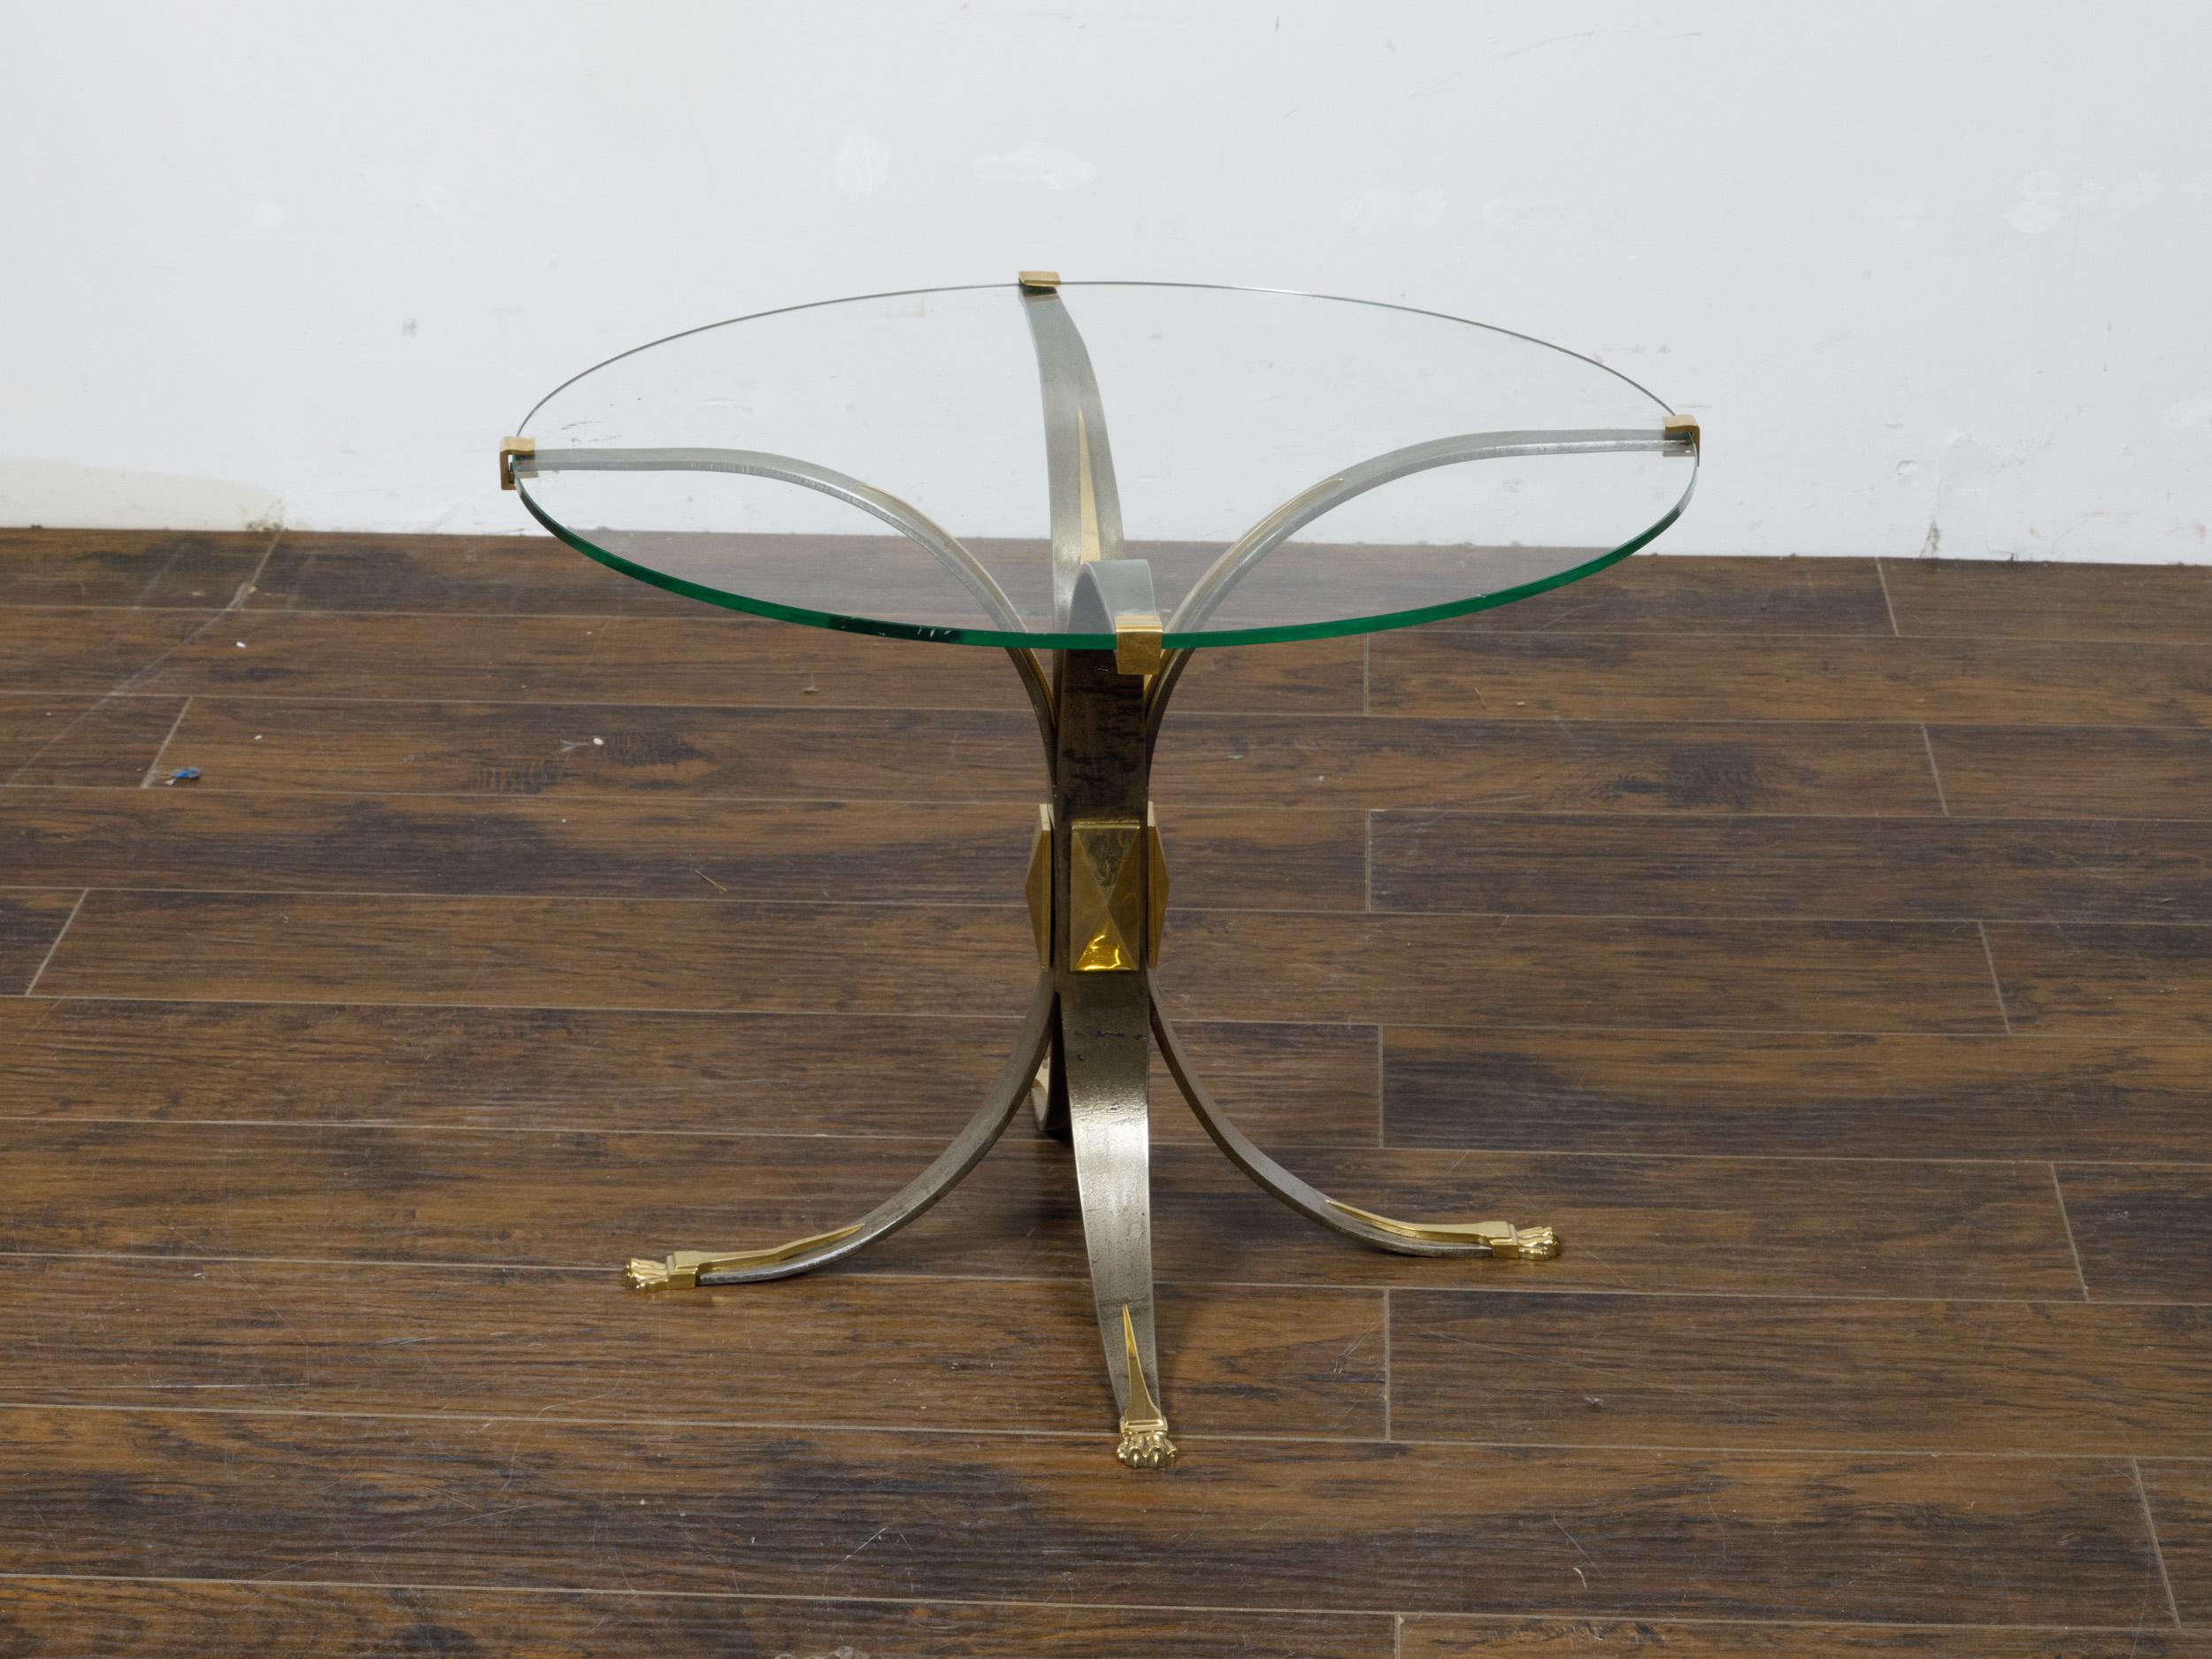 A French Art Deco period steel and brass drinks table from circa 1930, with circular glass top, four splaying legs and lion paw feet. This sophisticated French Art Deco drinks table, dating back to around 1930, is a paragon of the era's penchant for